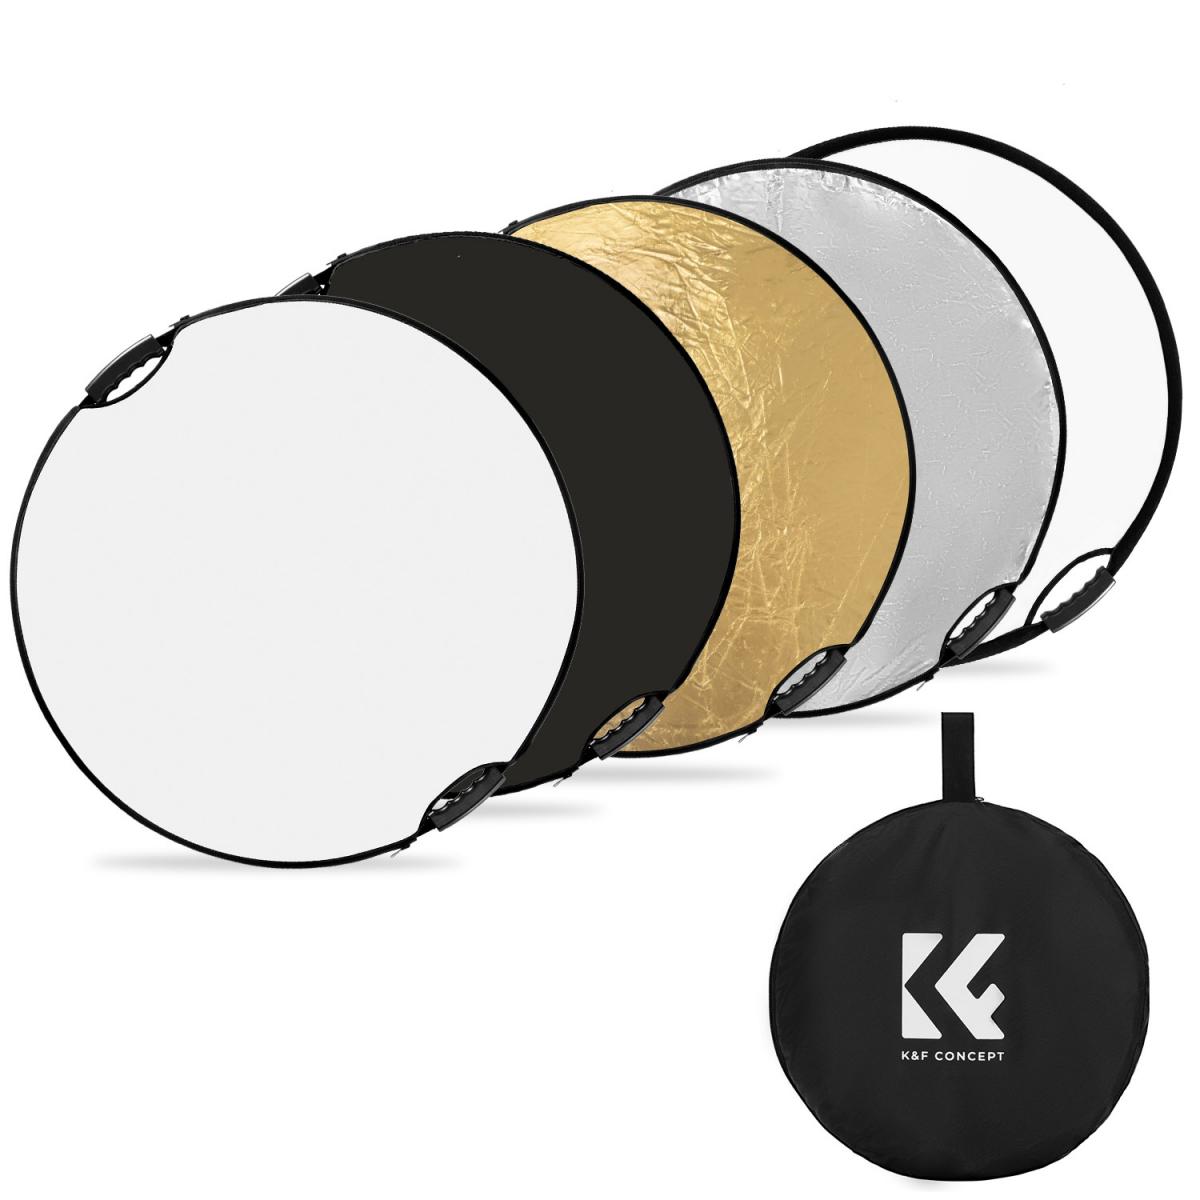 Five-in-One Circular Reflector with Handle 110cm Gold Silver Black